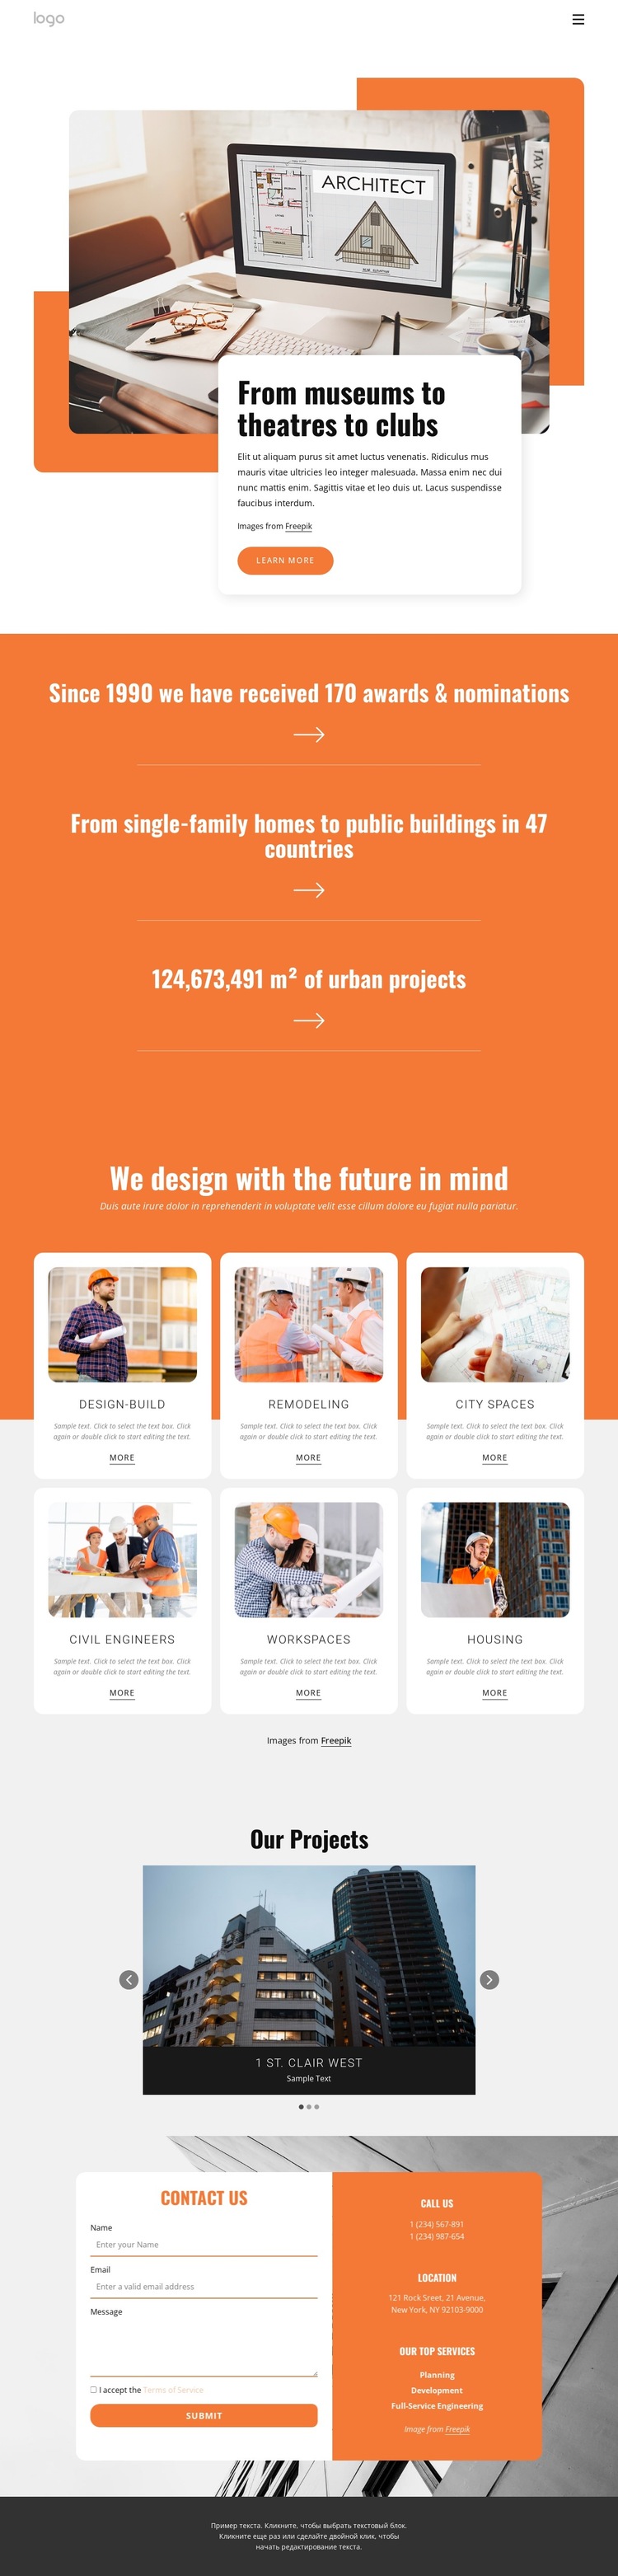 We are an independent firm, owned in trust by our members HTML5 Template